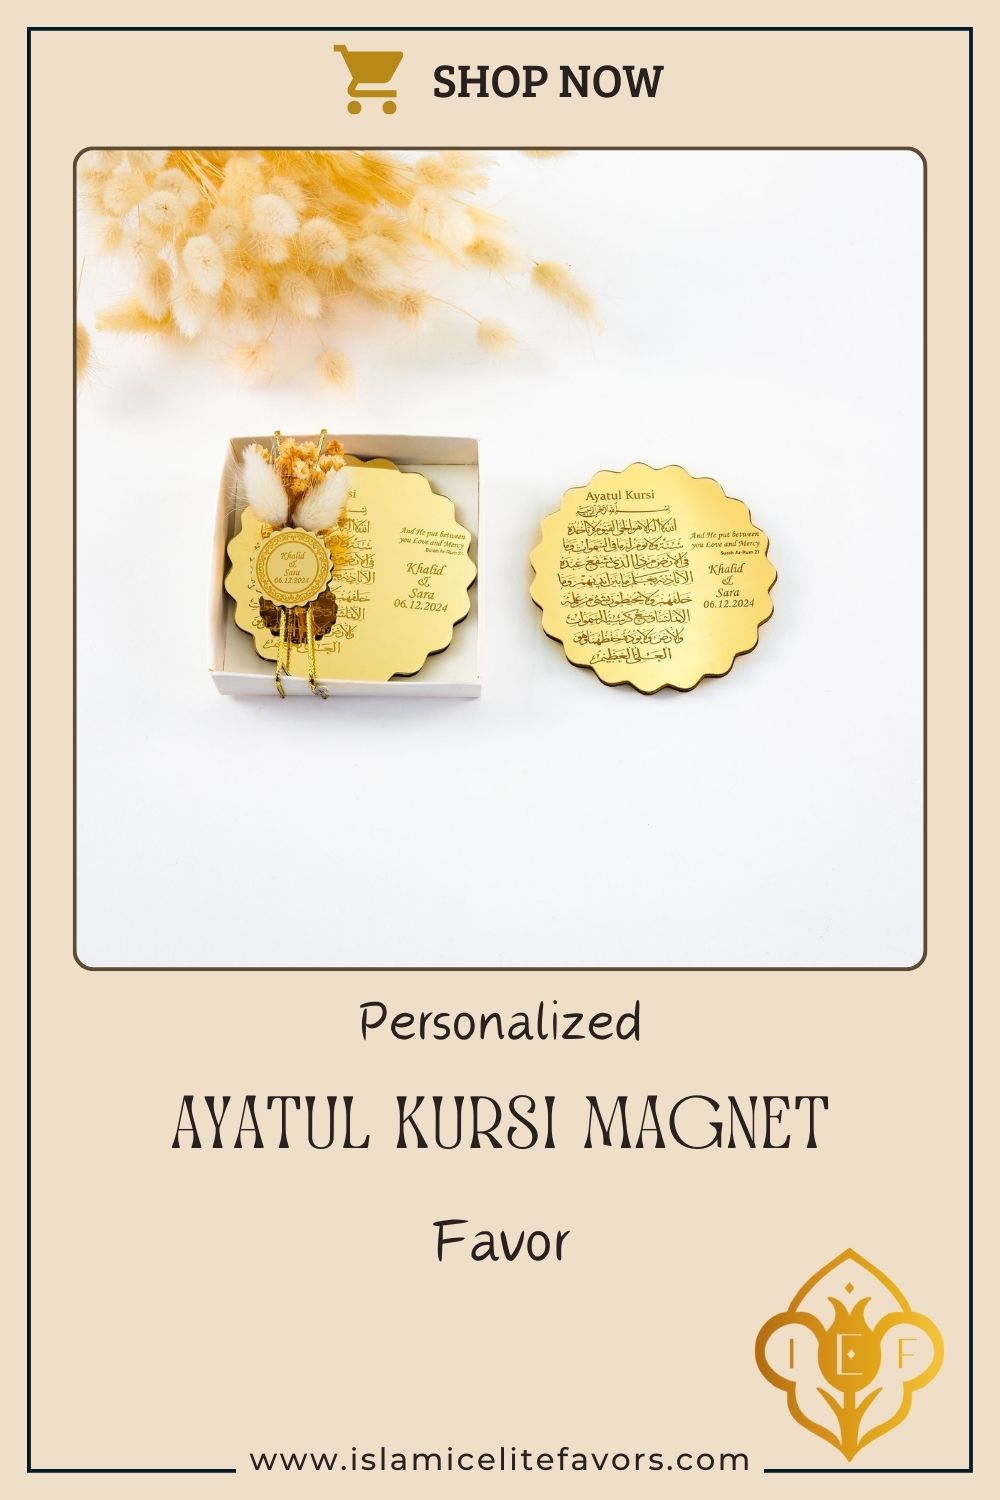 Personalized Ayatul Kursi Magnet Favor with Natural Dried Flower. Explore an exquisite collection of customized Islamic handmade gifts suitable for various occasions, including Weddings, Nikkah ceremonies, Engagements, Baby Showers, Bridal Showers, Birthdays, Ameen celebrations, Islamic parties, Ramadan, Eid, Hajj, Umrah, Mother’s Day, Father’s Day, Valentine’s Day, Anniversaries, and Graduations. Each gift is thoughtfully crafted to reflect the essence of these special moments.